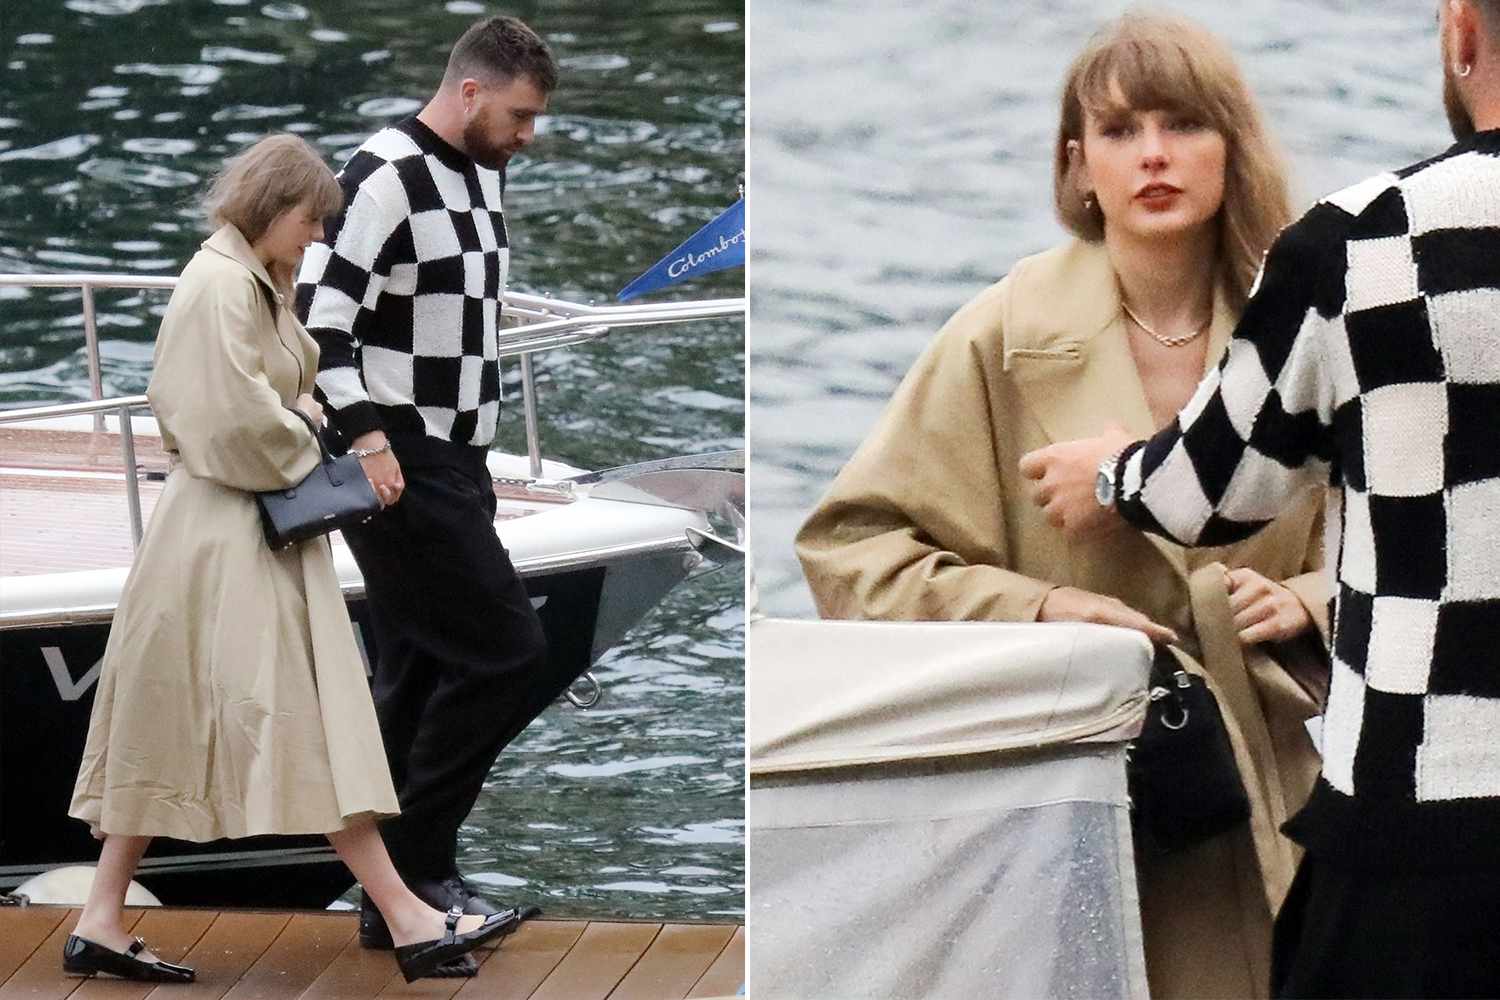 Taylor Swift Piles on Versace Accessories as Travis Kelce Goes Full Hypebeast in $1,285 Sweater for Boat Date